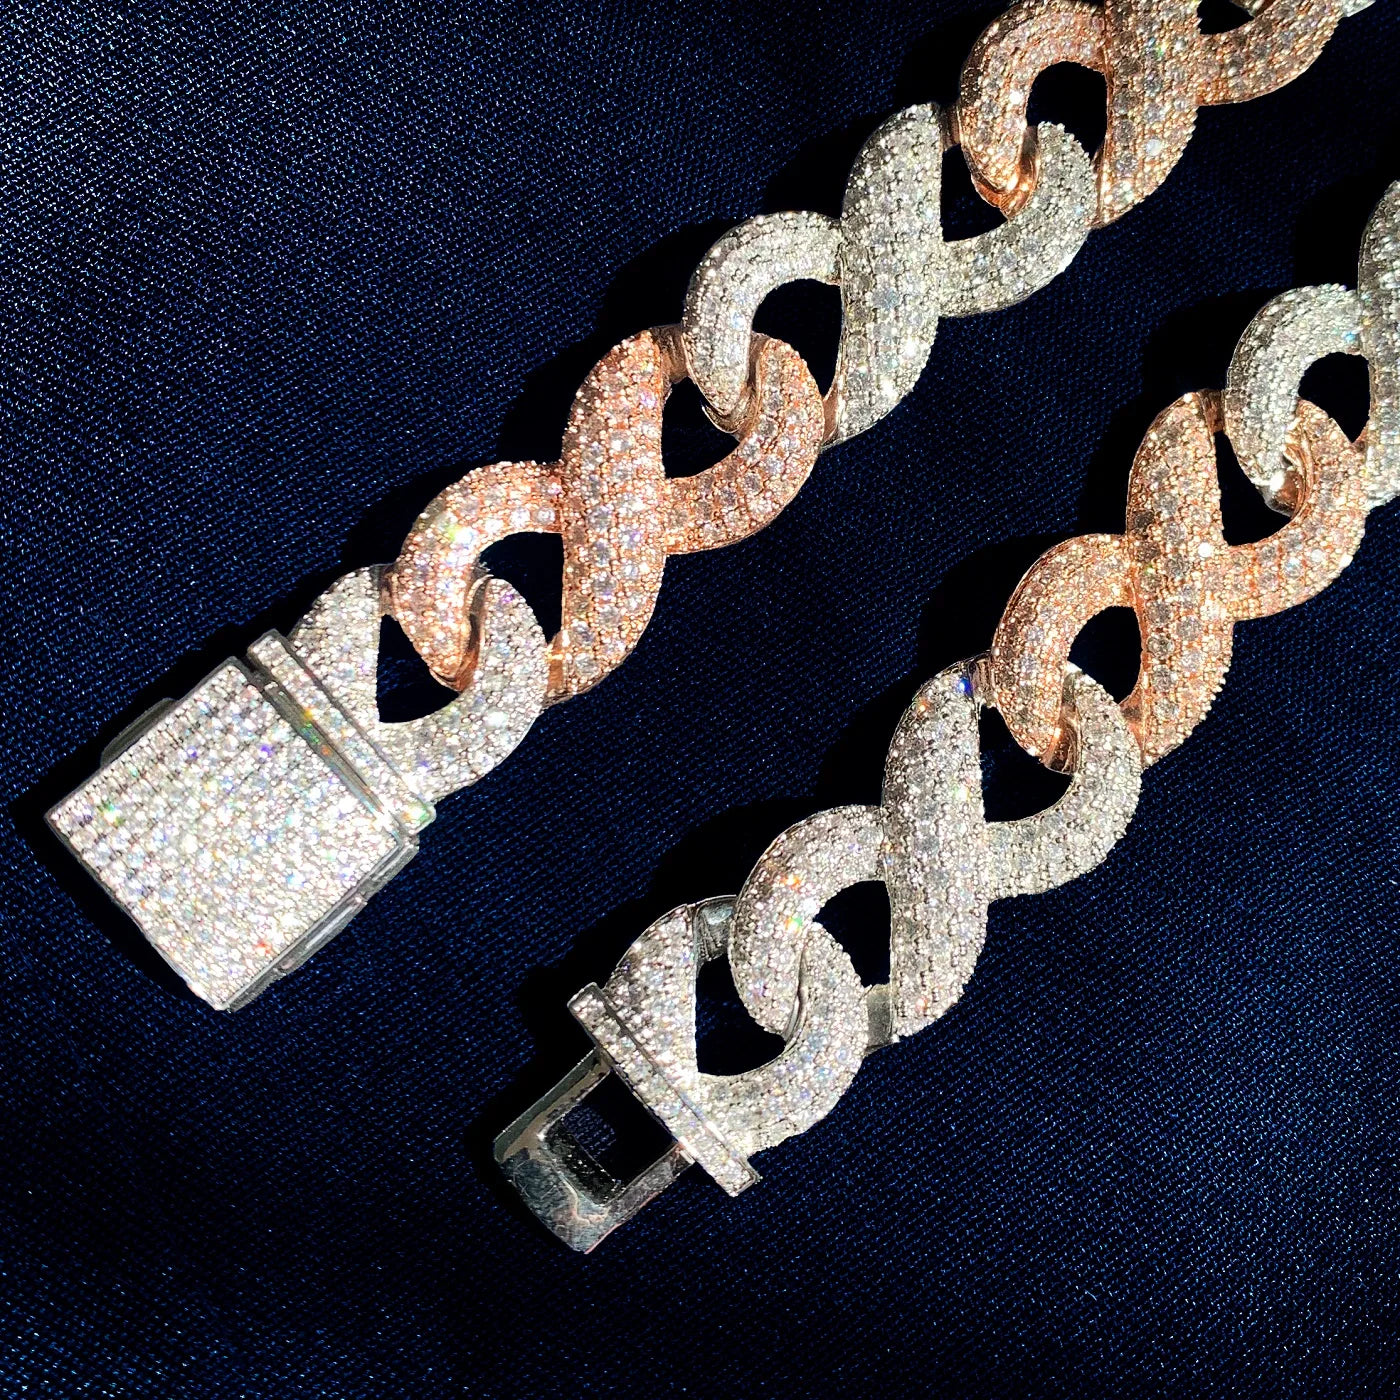 TWO-TONE ROSE GOLD INFINITY CUBAN LINK CHAIN NECKLACE - 15MM